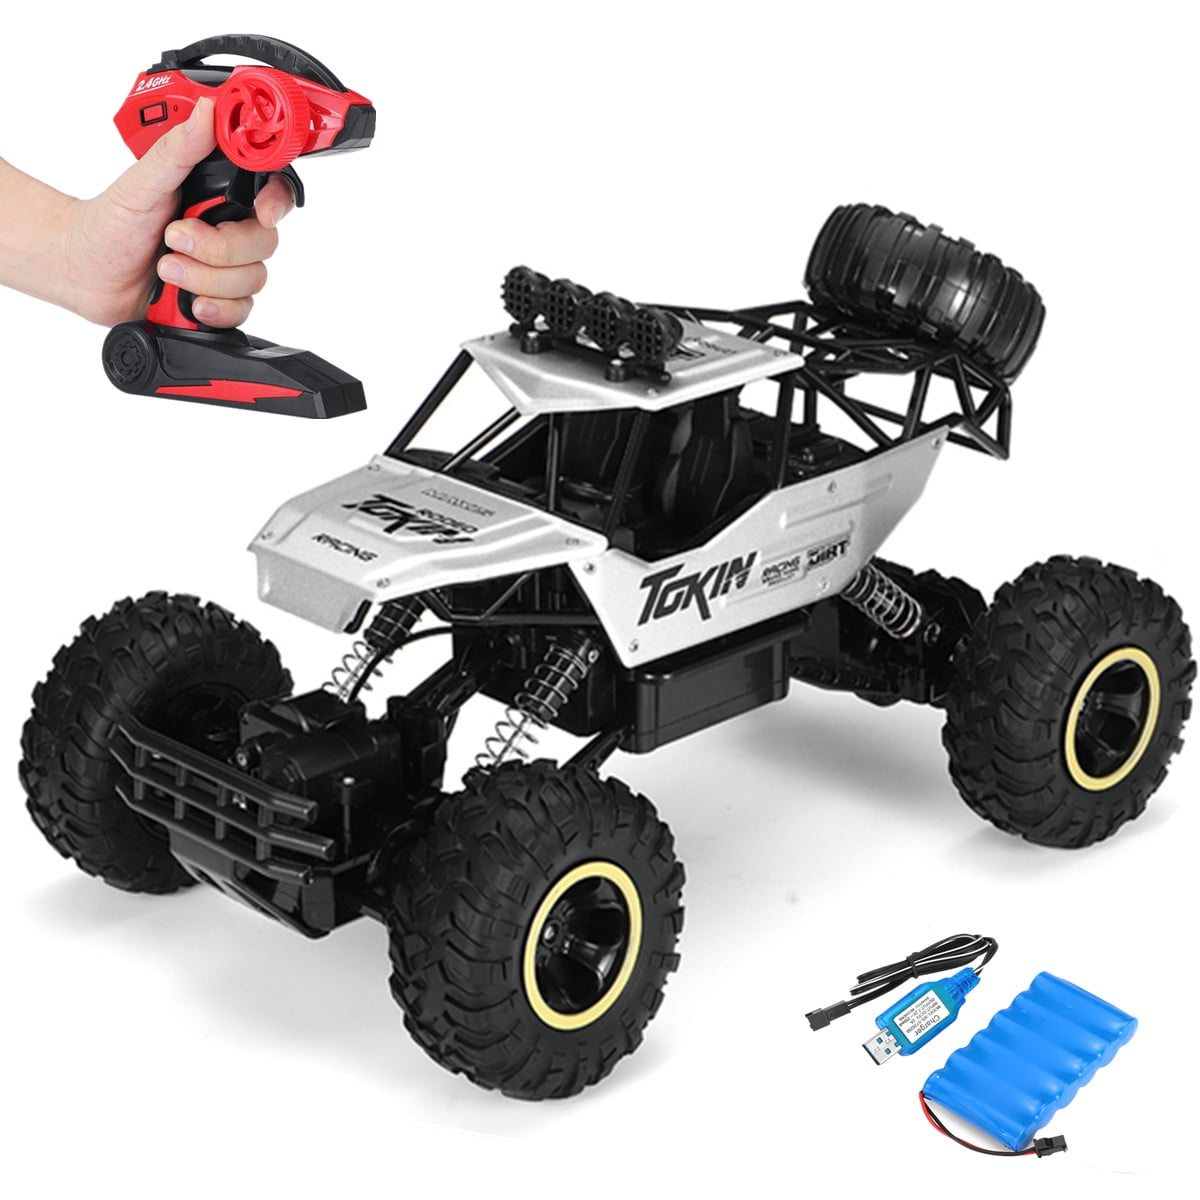 4WD RC Truck Off-Road Vehicle 2.4G Remote Control Buggy Crawler Car 1:12